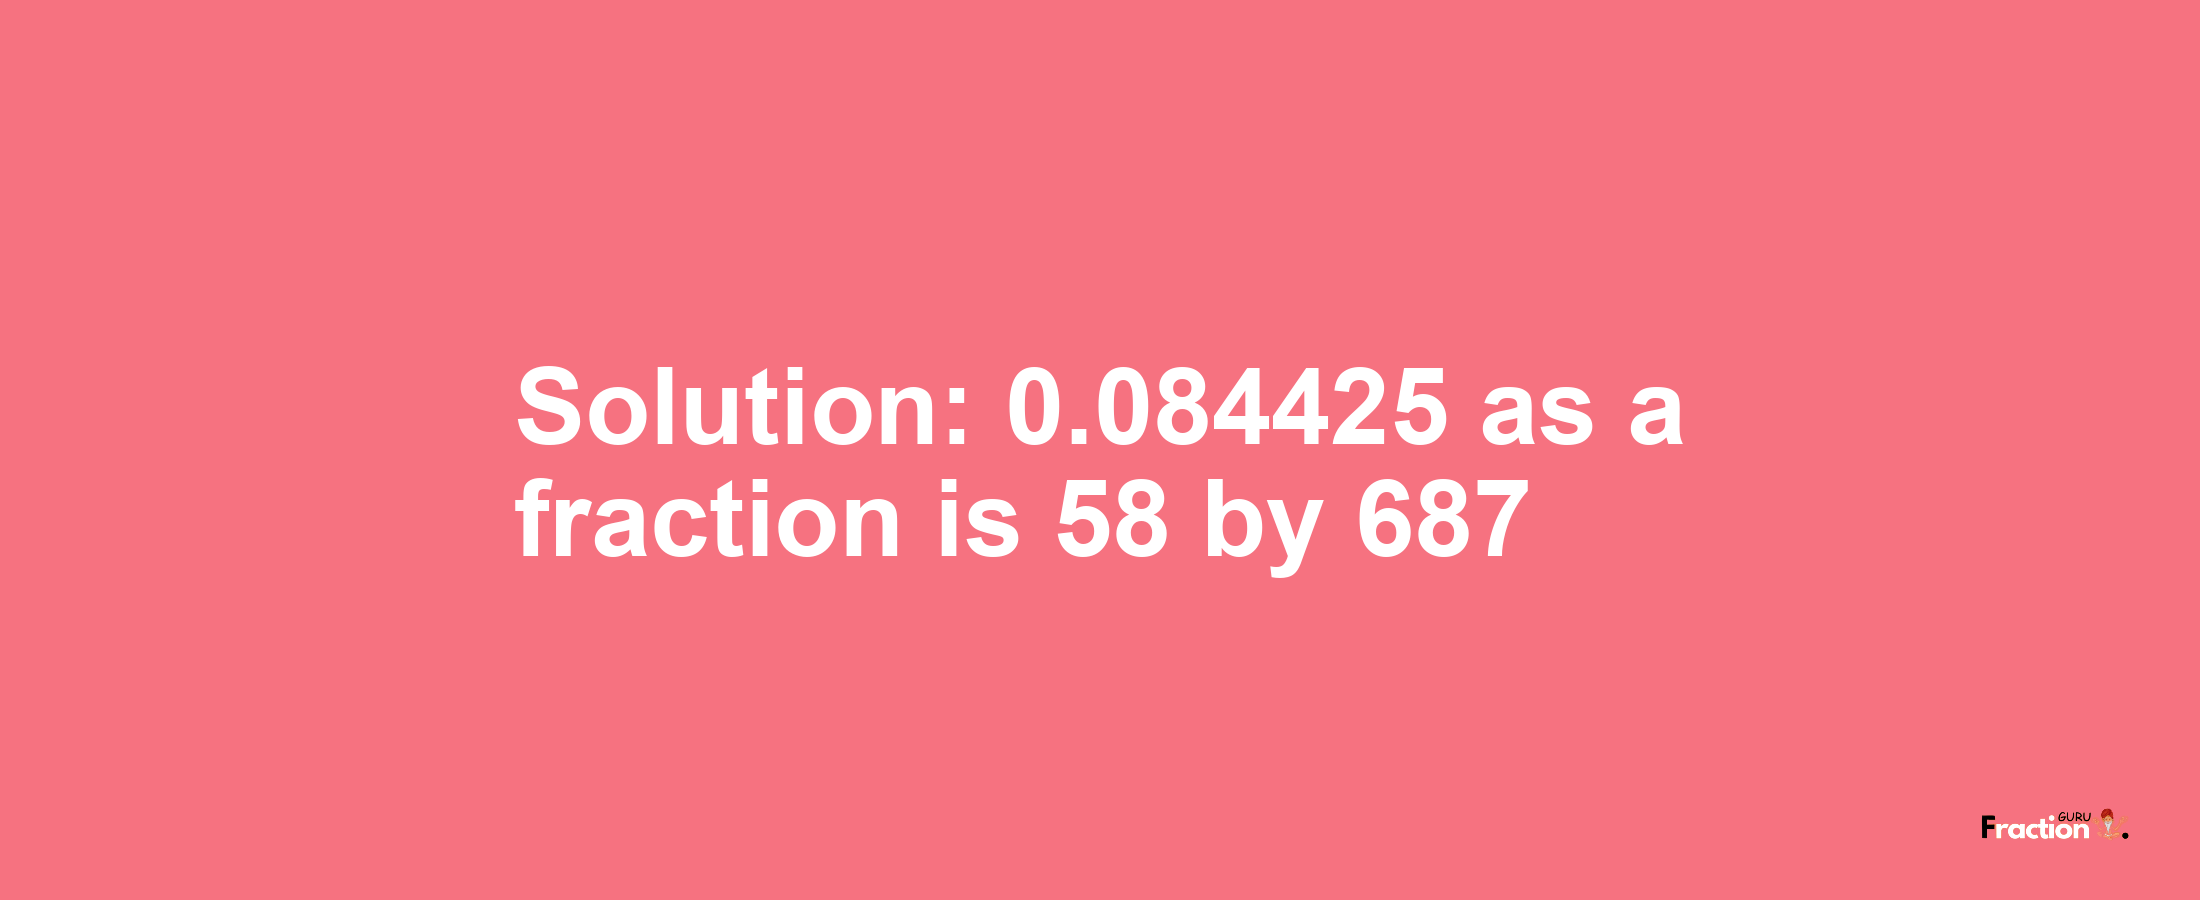 Solution:0.084425 as a fraction is 58/687